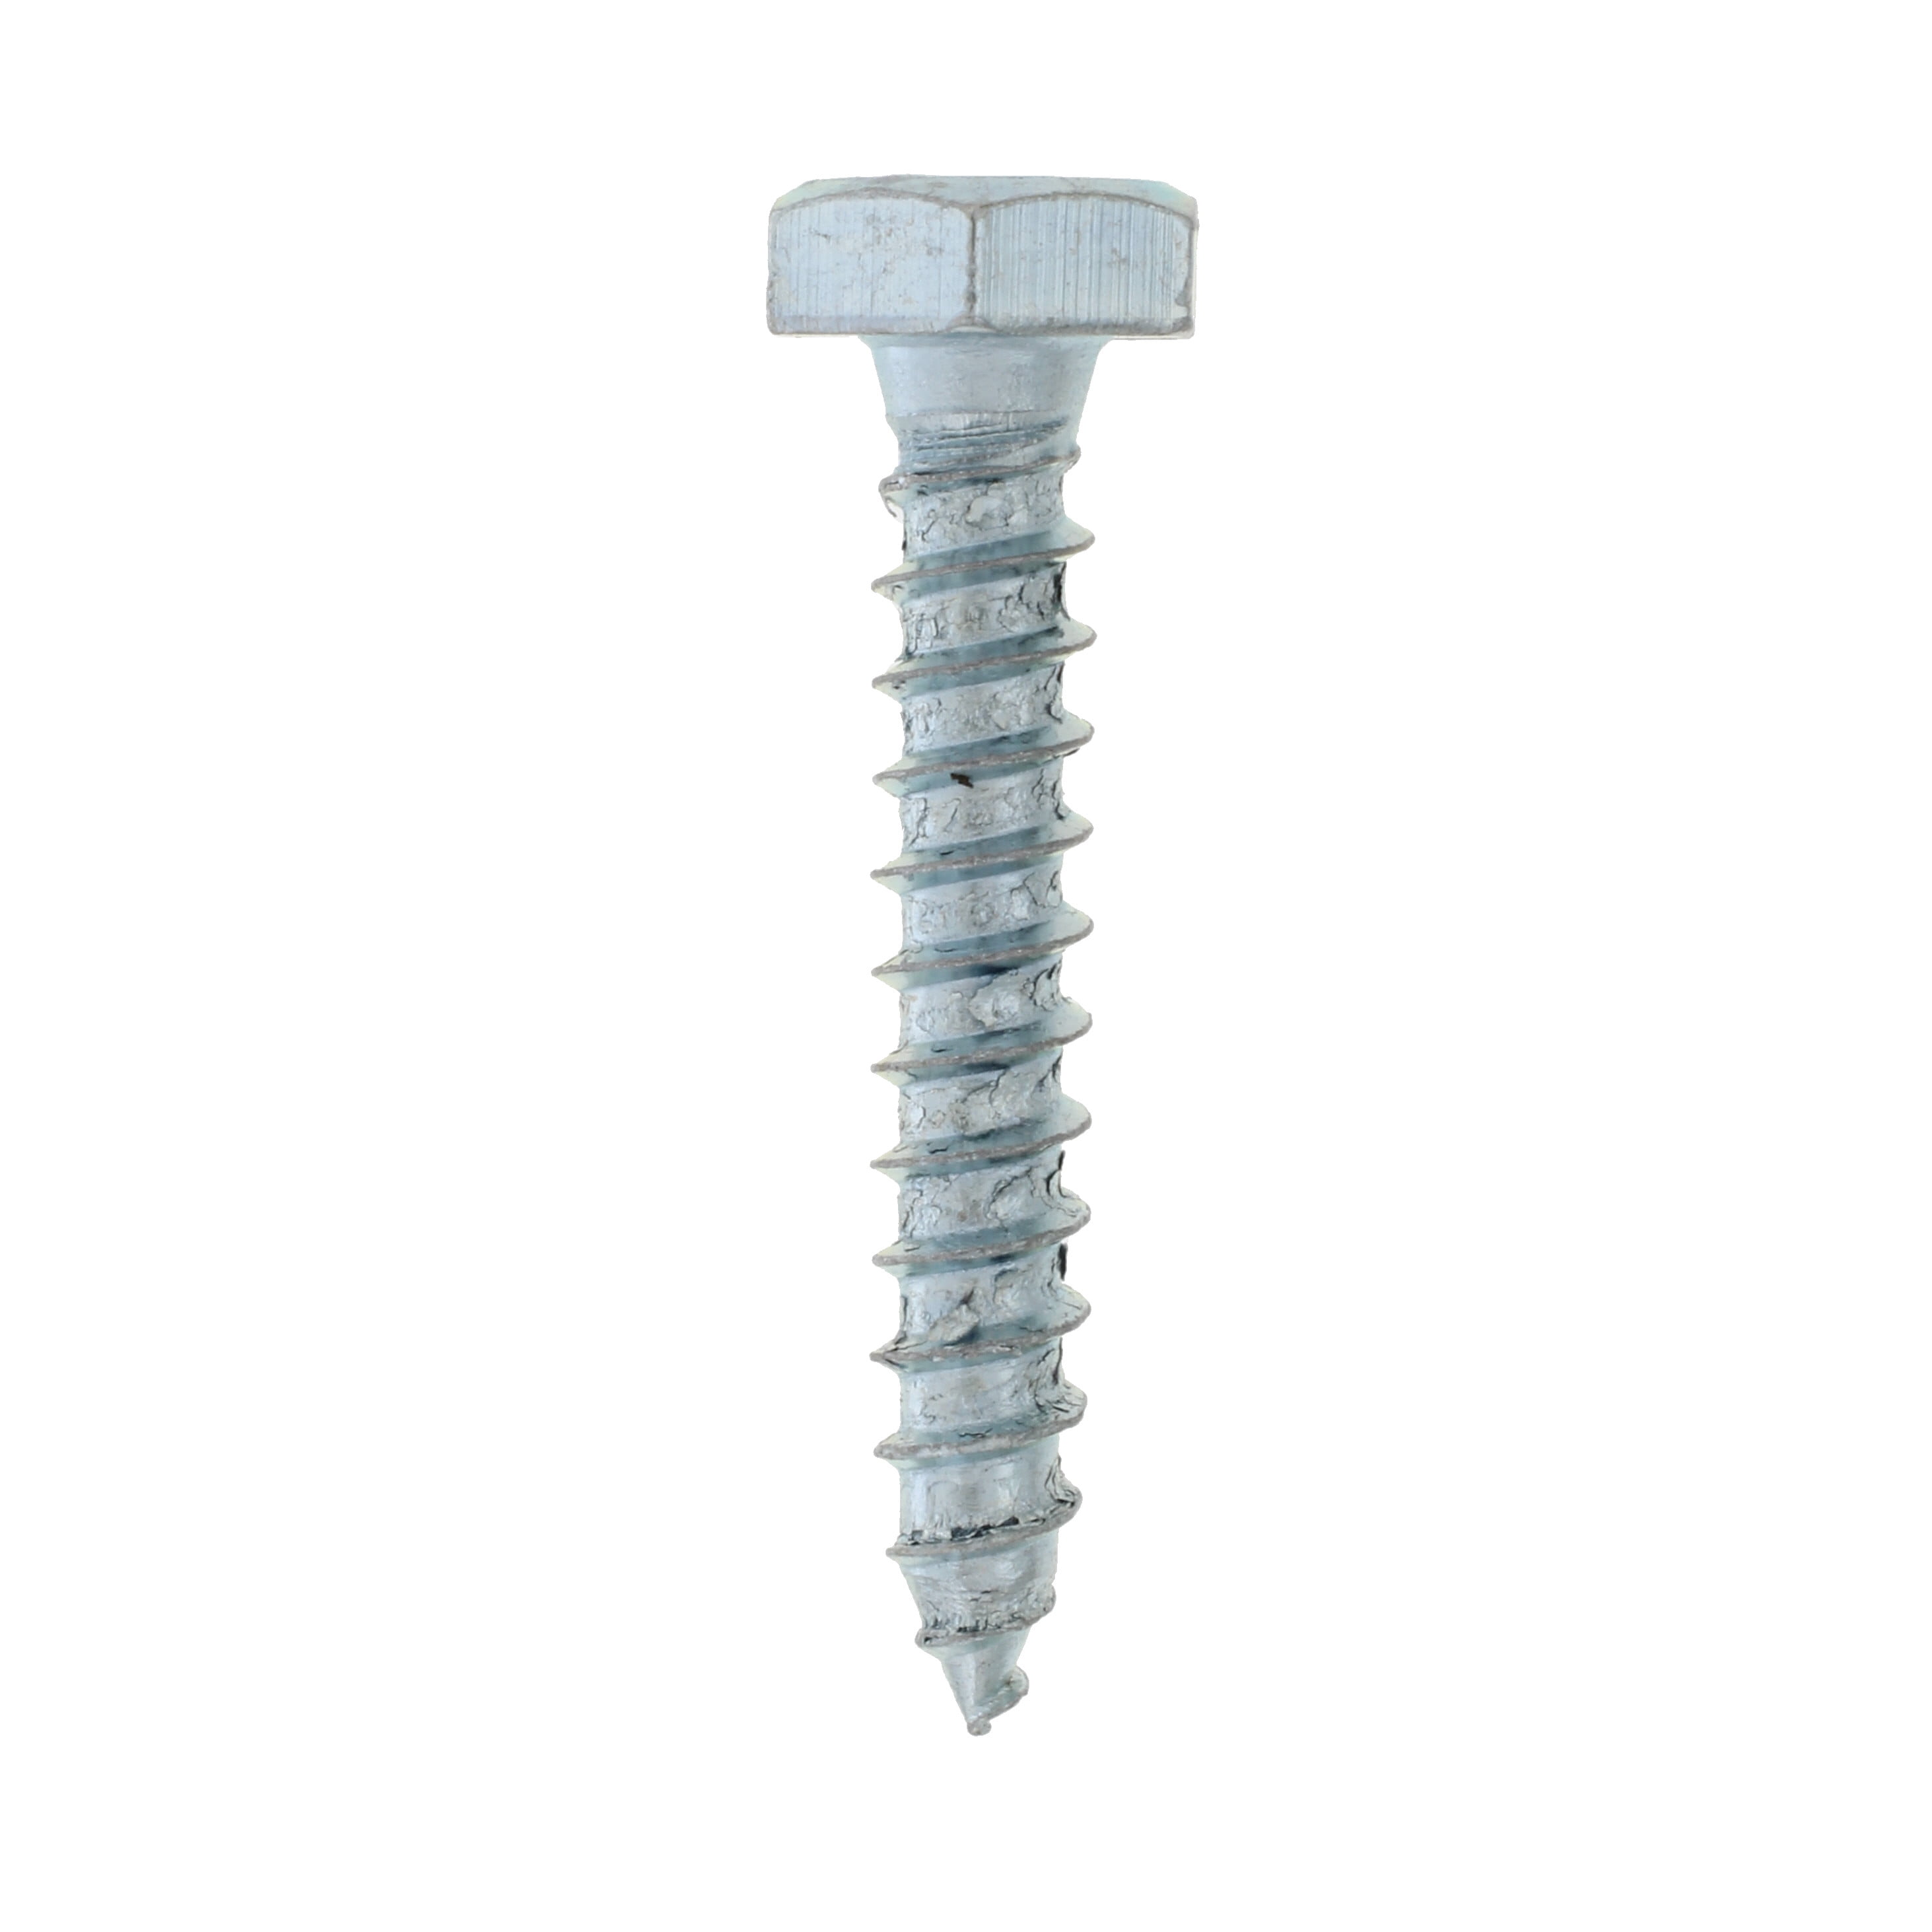 Steel Lag Screw 1/2 Threads Pack of 50 Hex Head 1-1/2 Length External Hex Drive Zinc Plated Finish